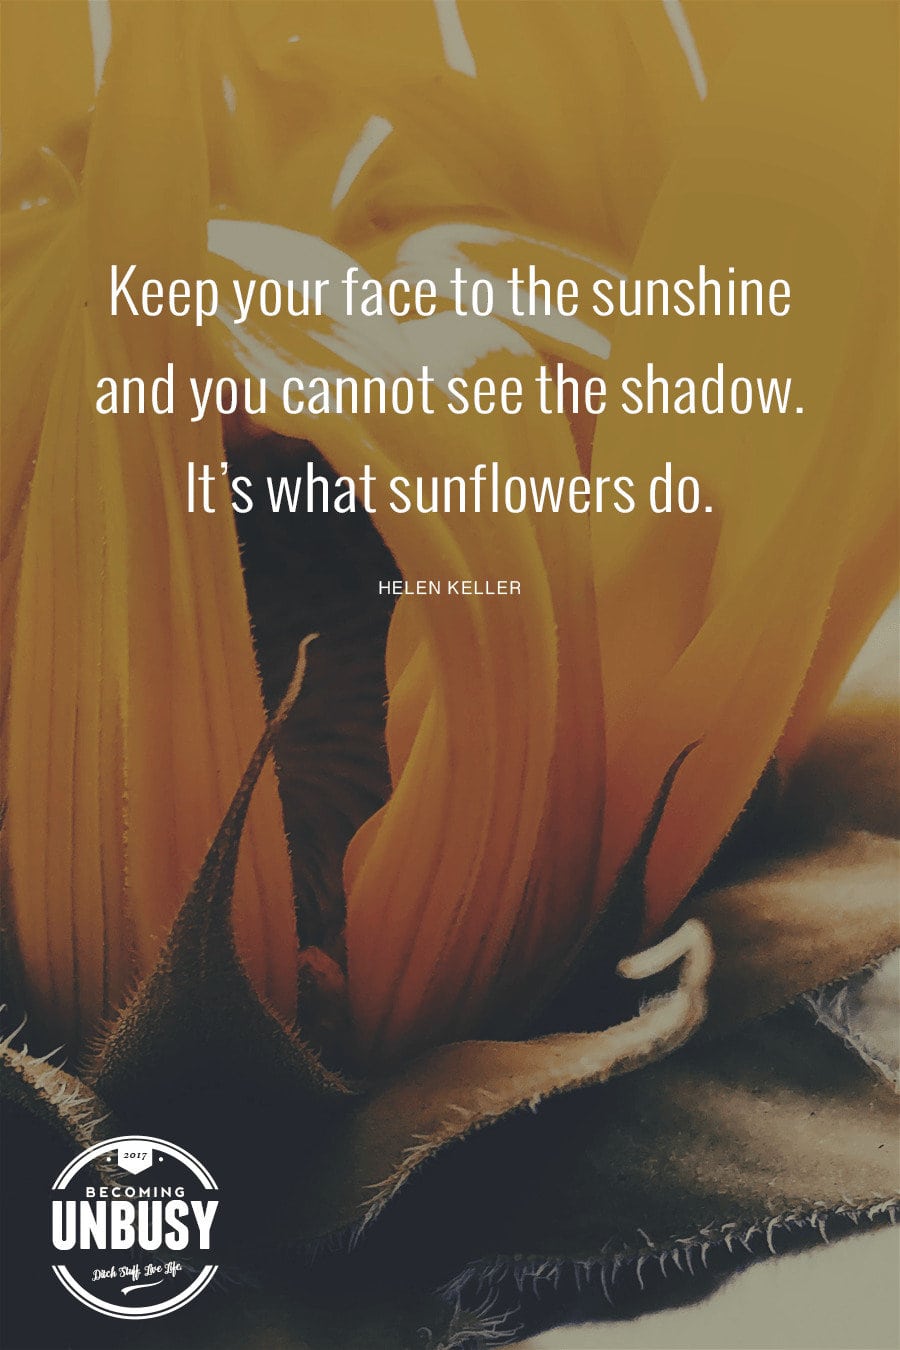 “Keep your face to the sunshine and you cannot see the shadow. It's what sunflowers do.” — Helen Keller